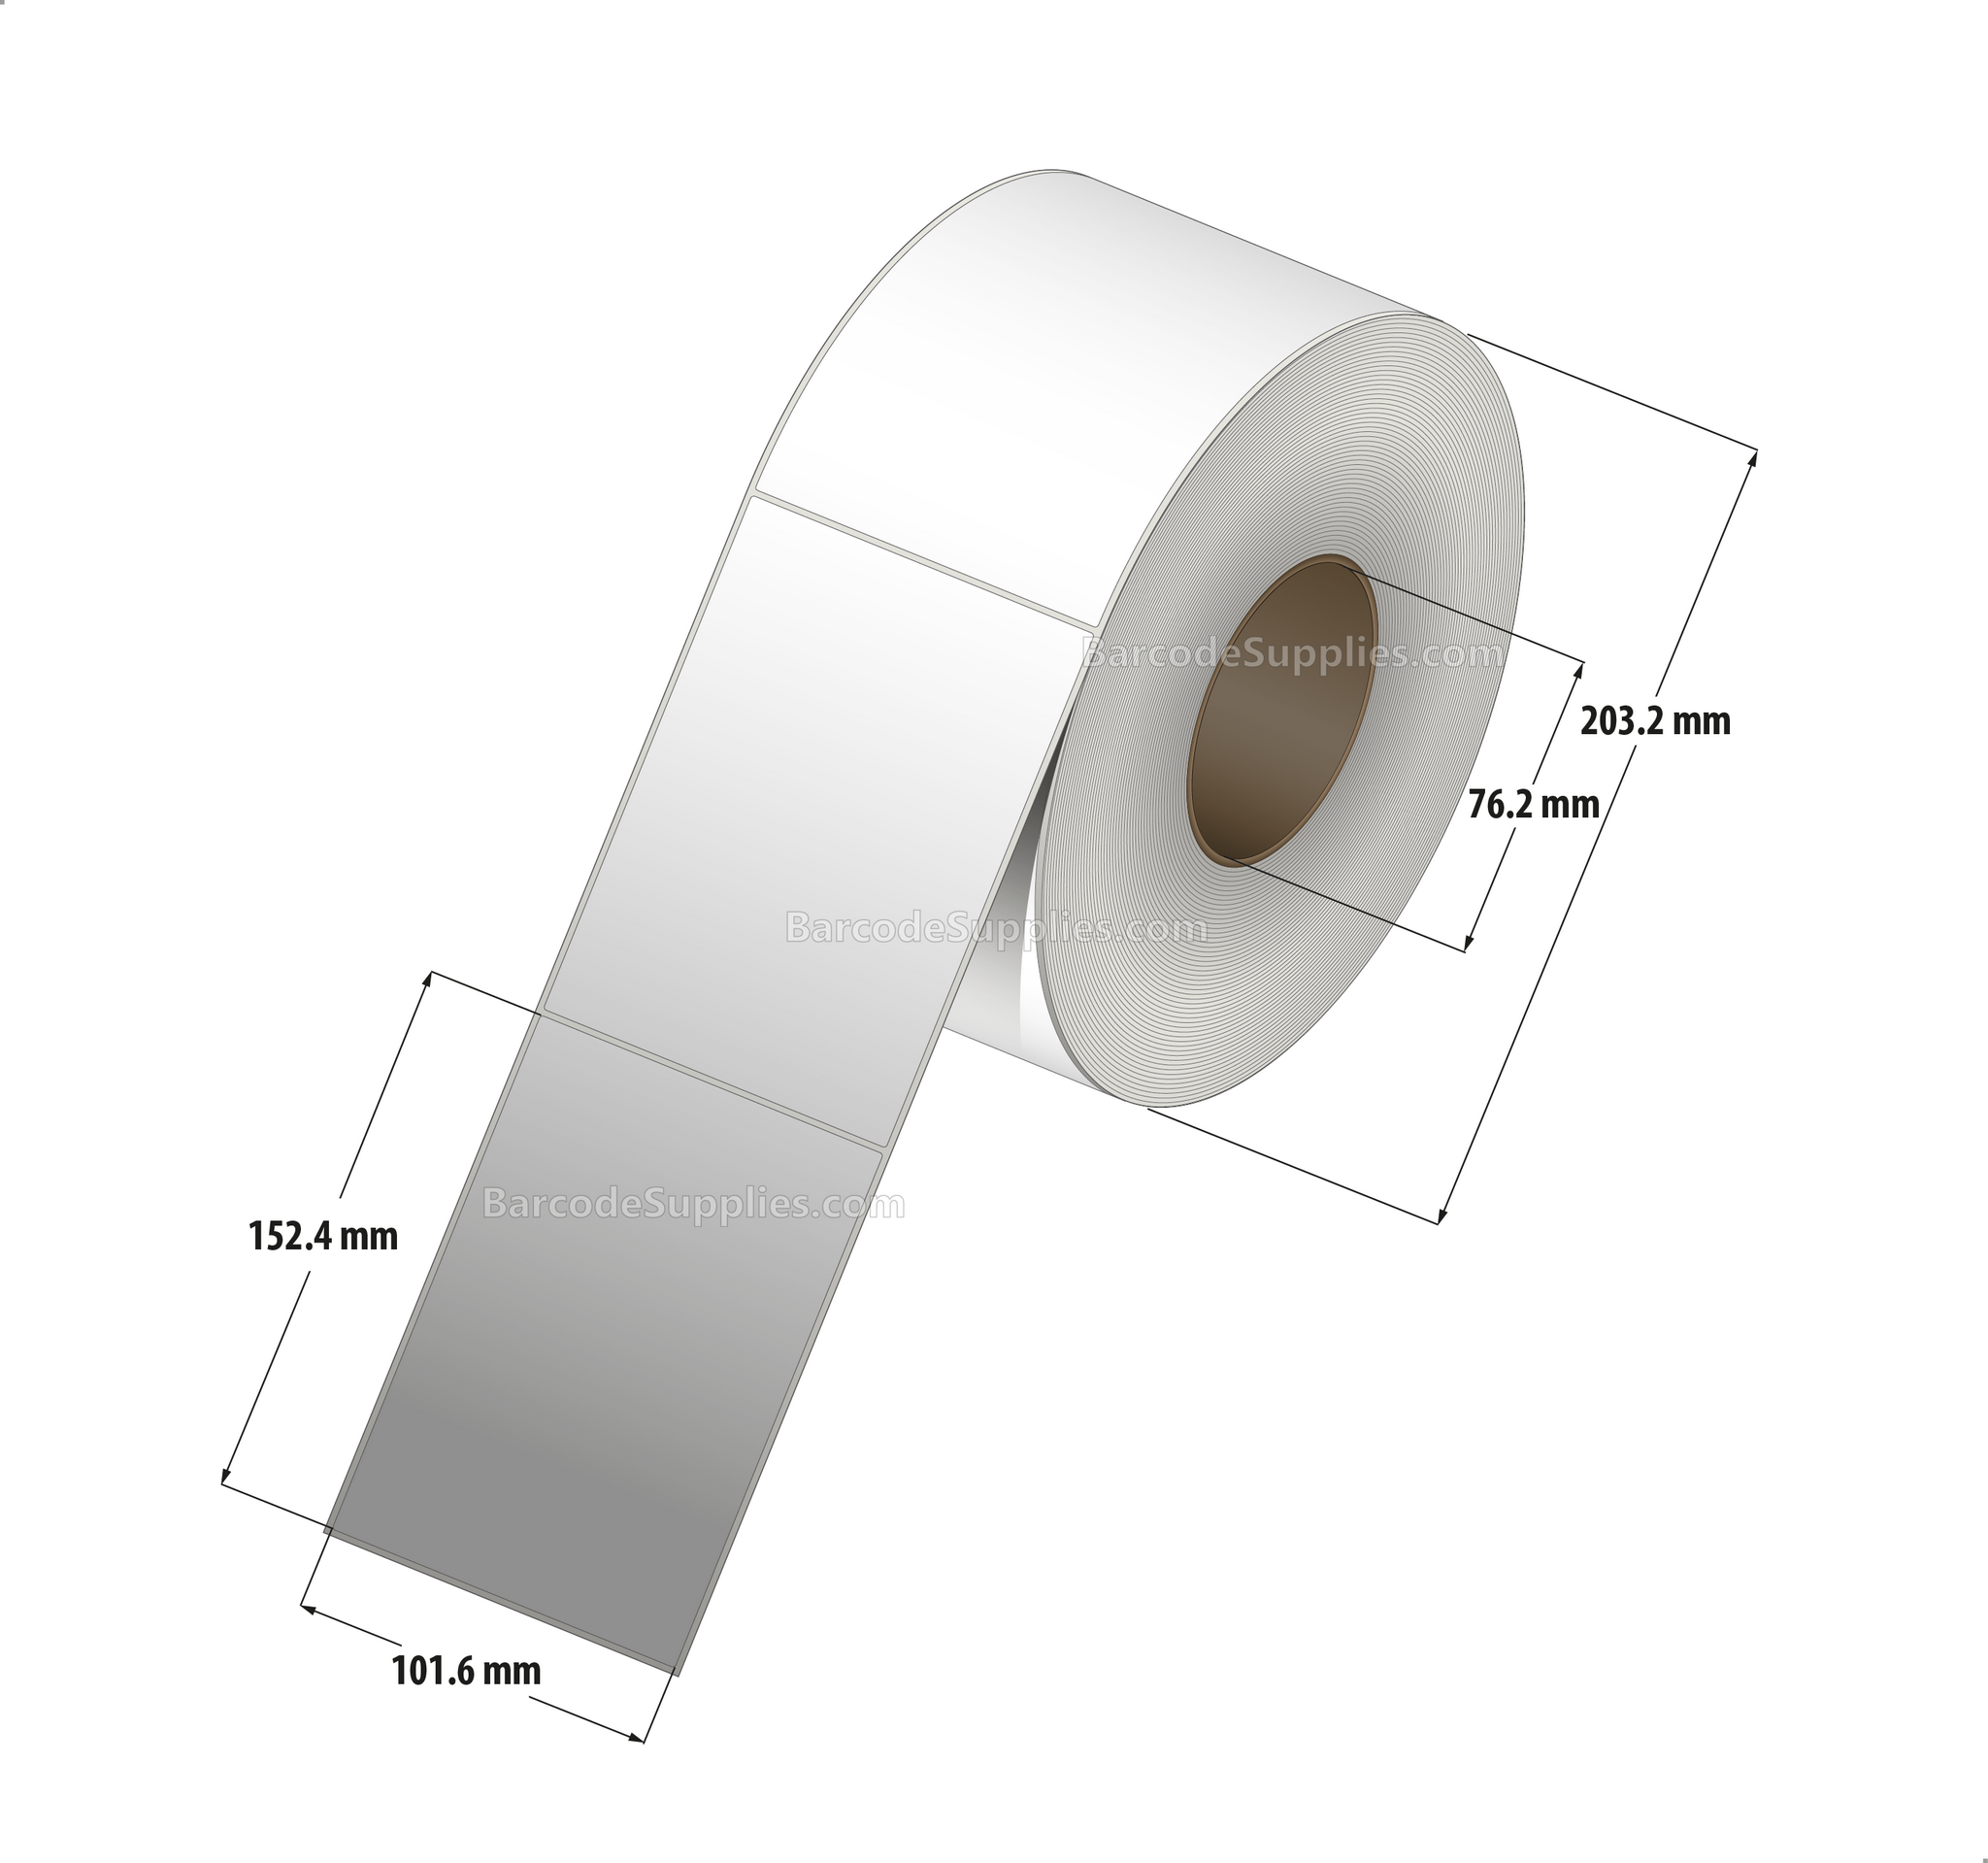 4 x 6 Direct Thermal White Labels With Acrylic Adhesive - No Perforation - 1000 Labels Per Roll - Carton Of 4 Rolls - 4000 Labels Total - MPN: RDS-4-6-1000-NP